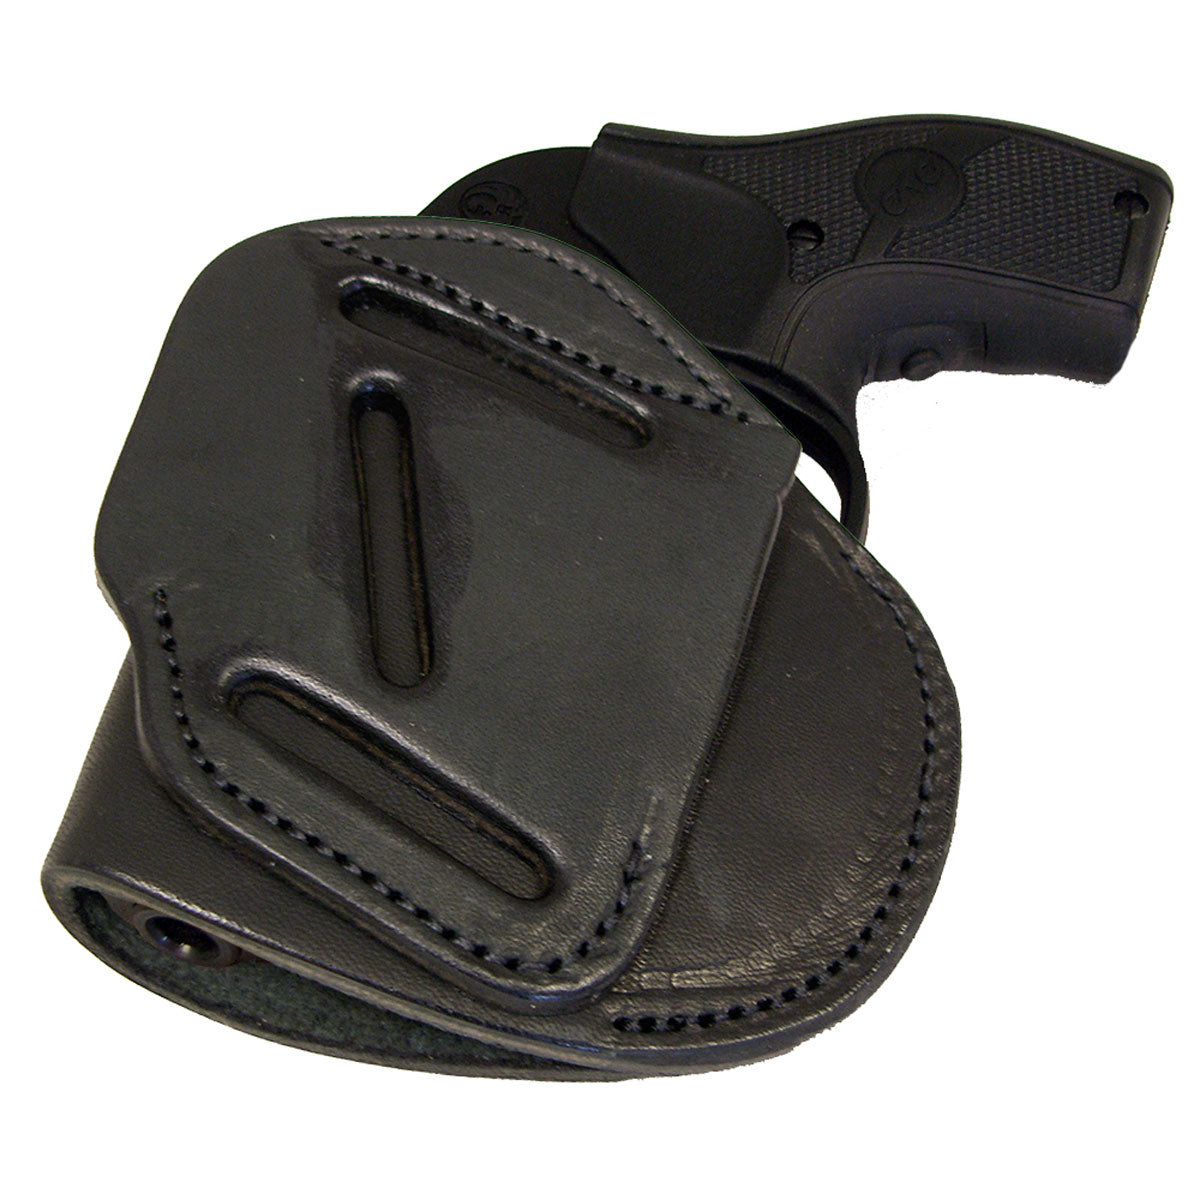 3 Way XDS Leather Holster - Black